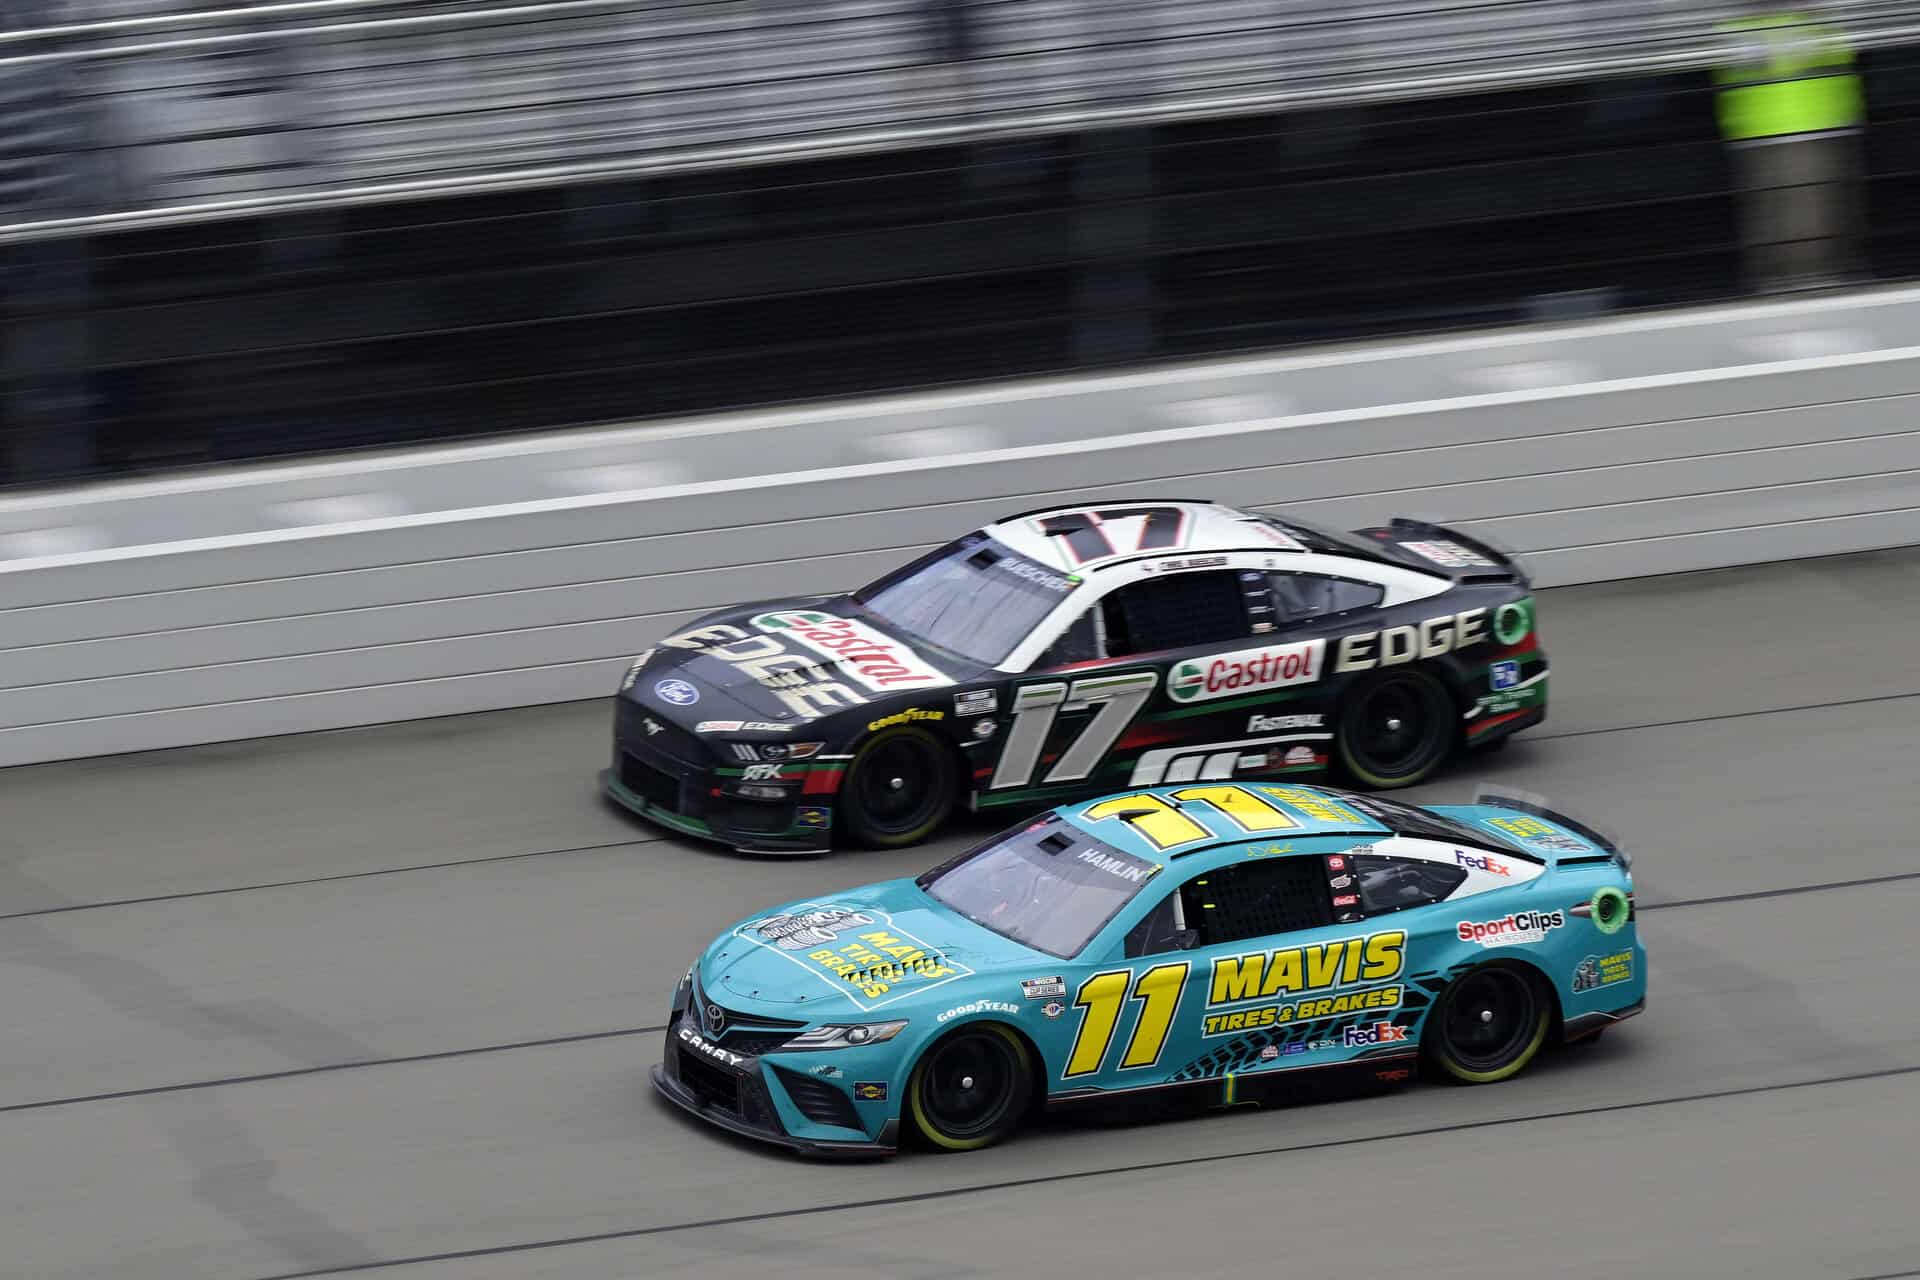 Joe gibbs racing's denny hamlin rebounded from stalling his toyota camry on pit road to score a top-five finish at michigan international speedway.